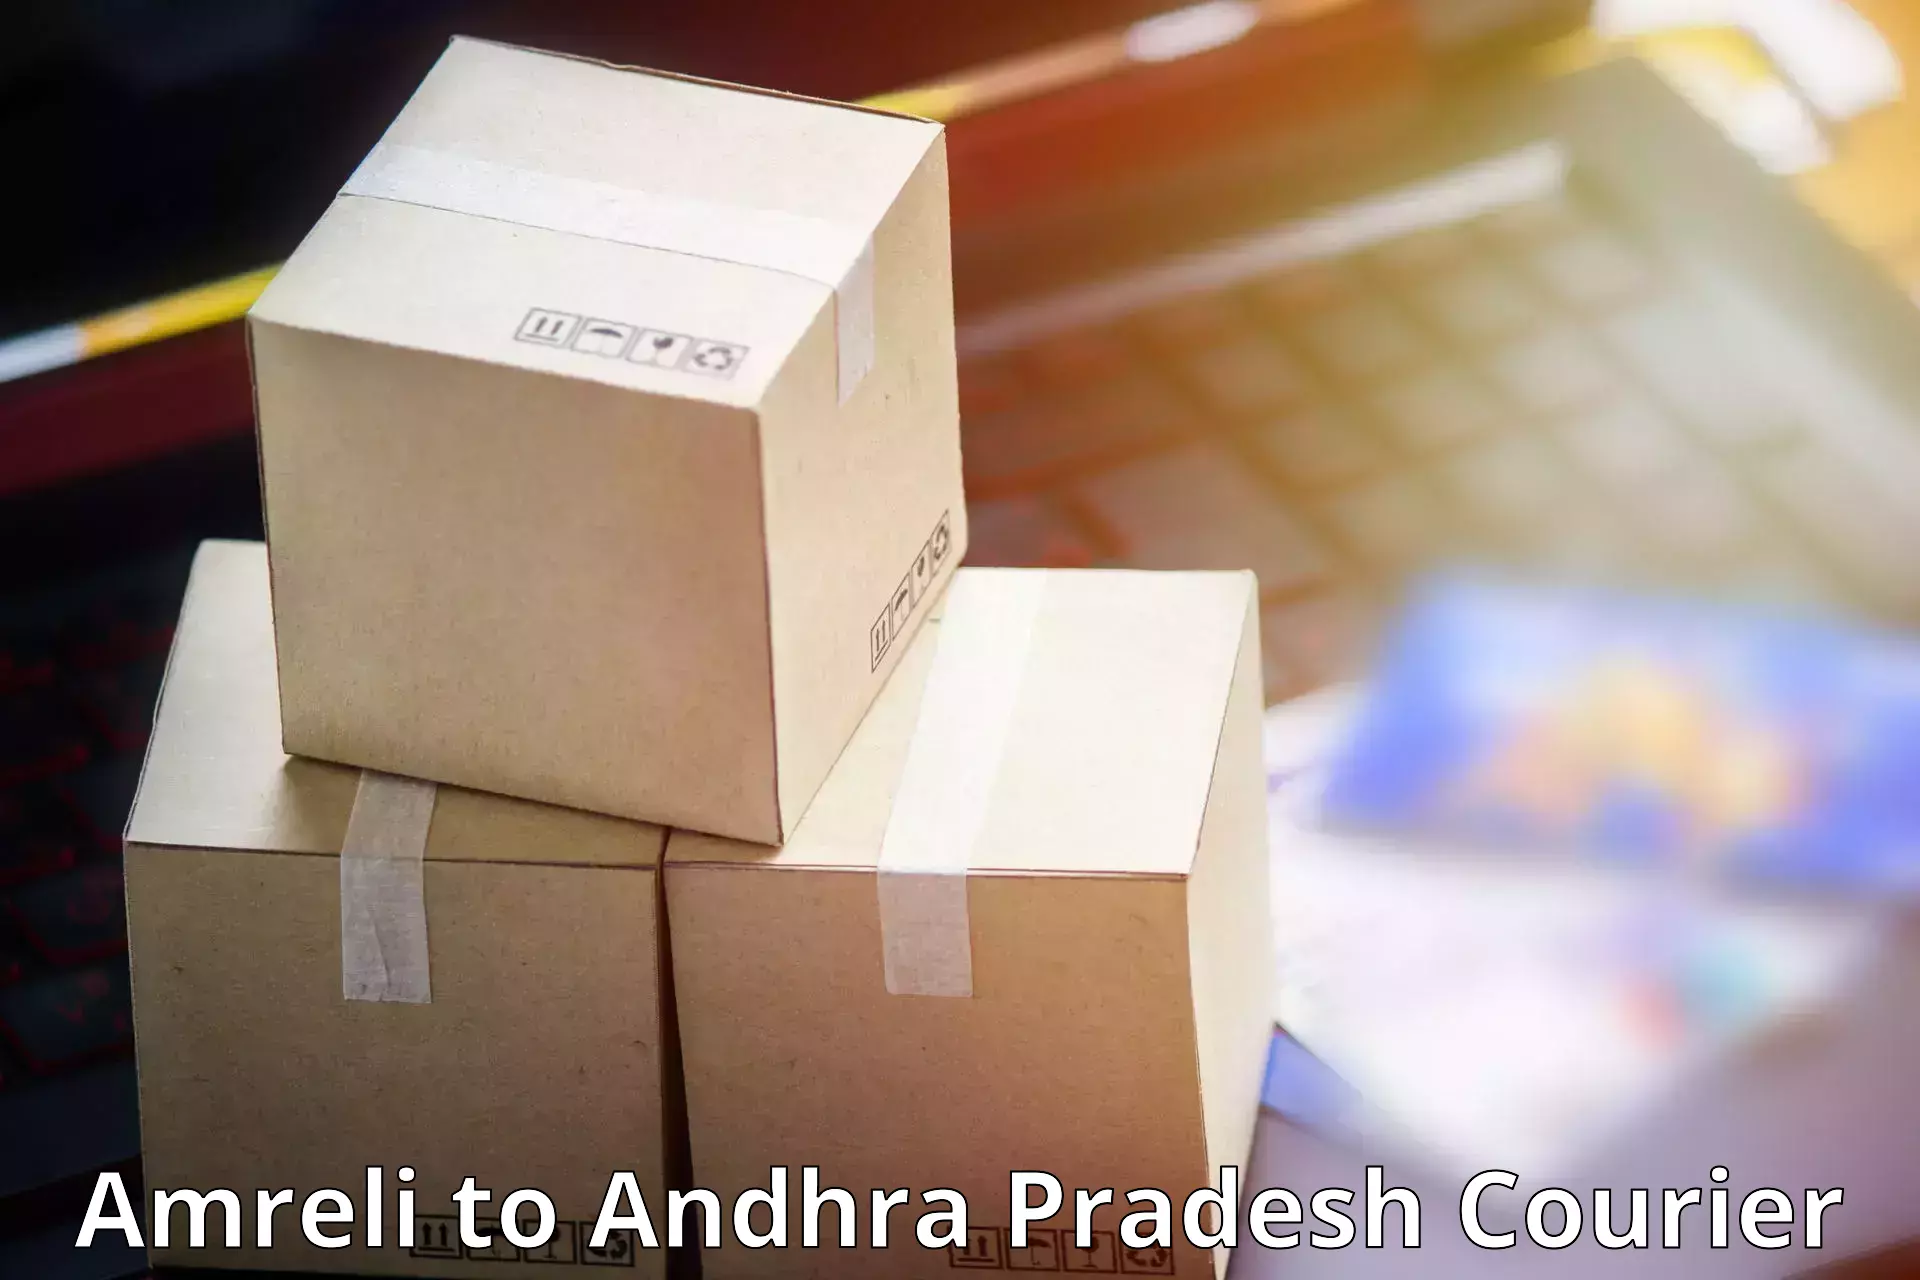 Delivery service partnership Amreli to Chintapalli